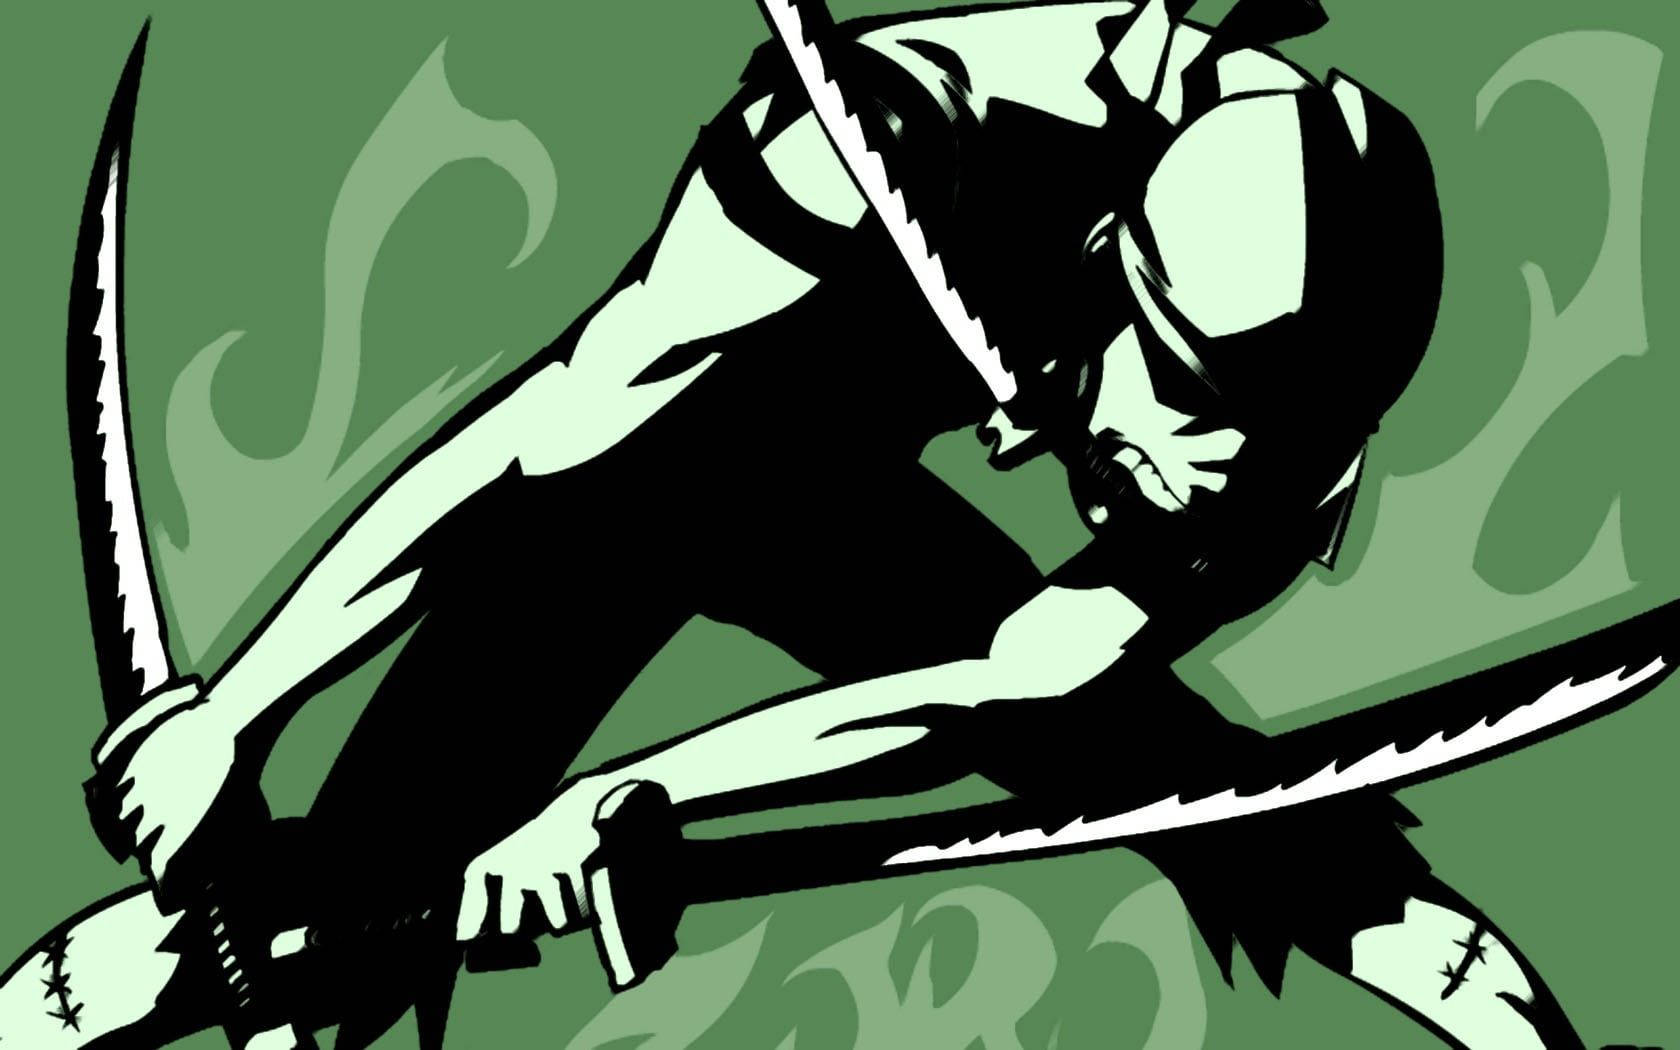 A Black Silhouette Of Zoro, The Sword-wielding Warrior, Ready To Take On All Challenges. Background